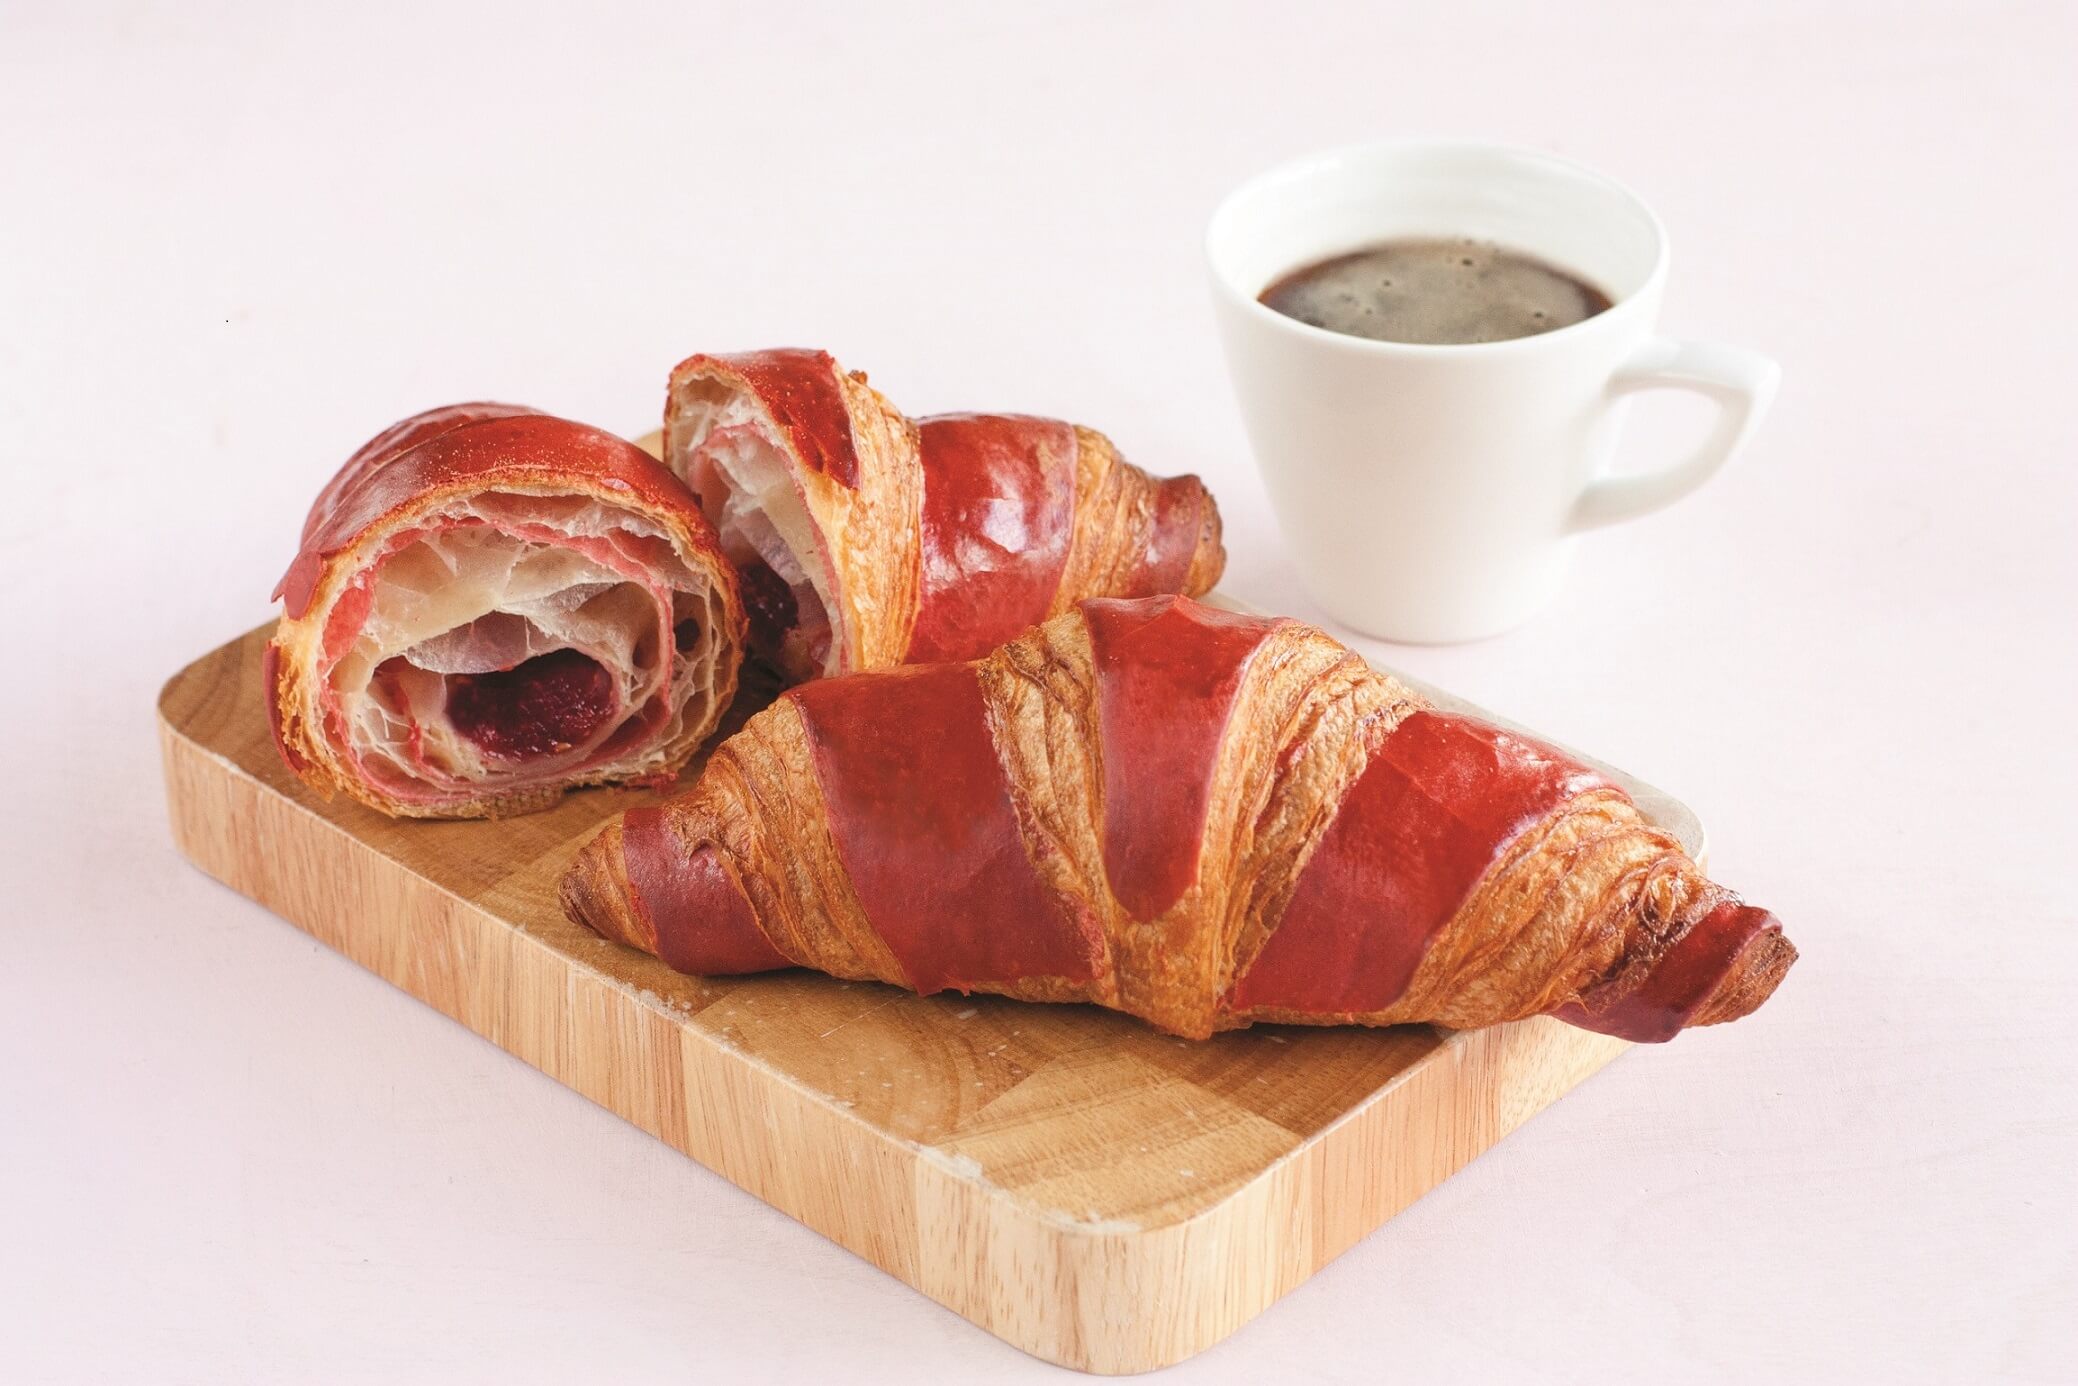 ARYZTA Food Solutions UK Brings Filled Colour Croissants to Breakfast and Snacking Menus